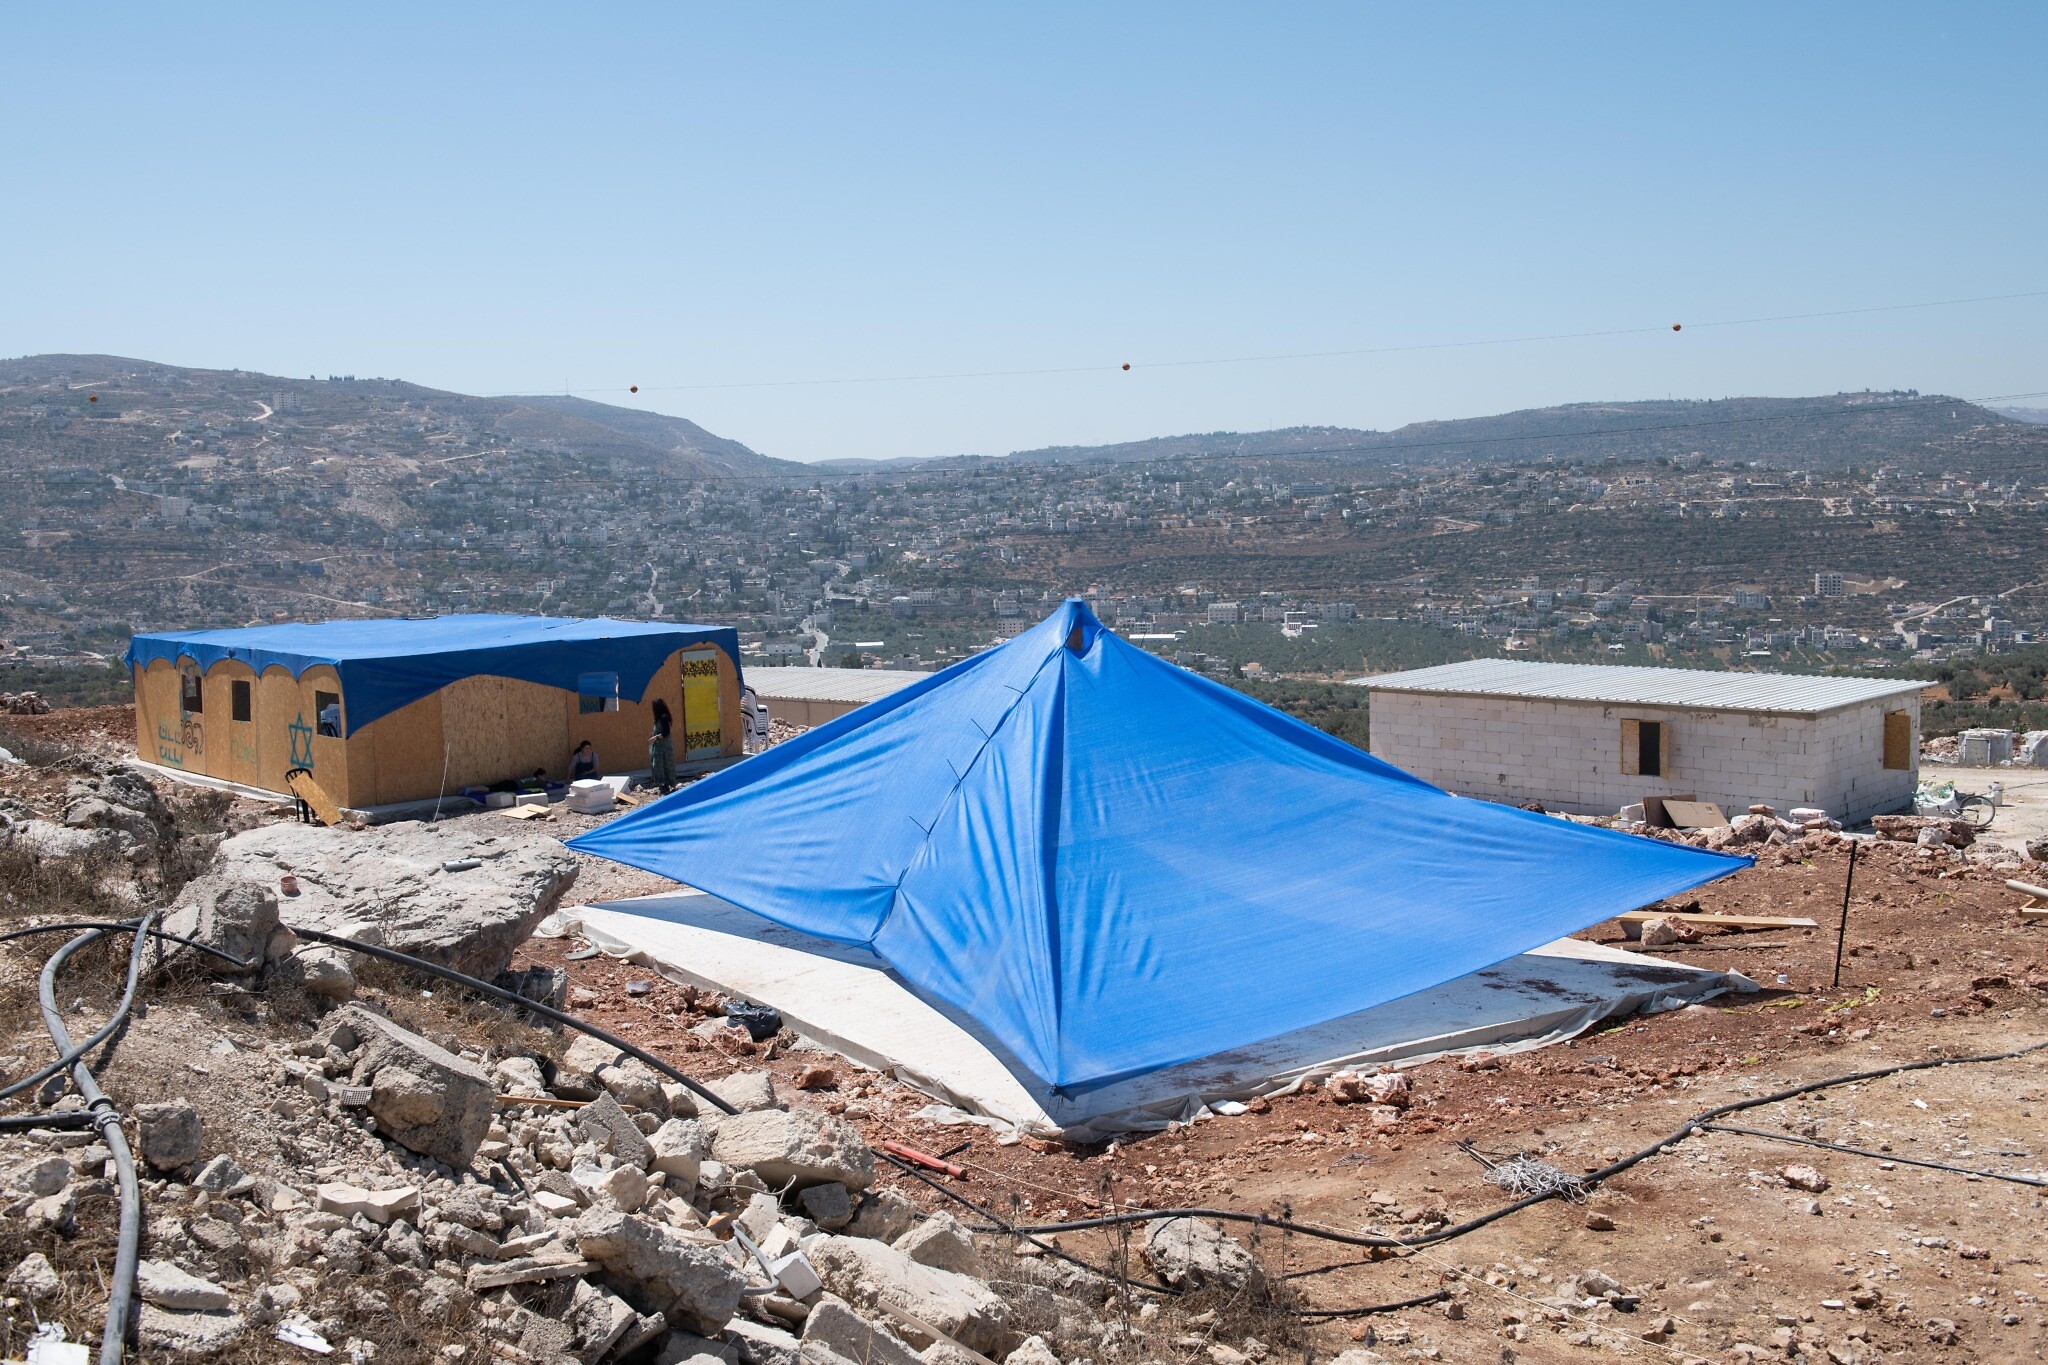 Bring tents': Evyatar activists try to stop razing of illegal West Bank  outpost | The Times of Israel